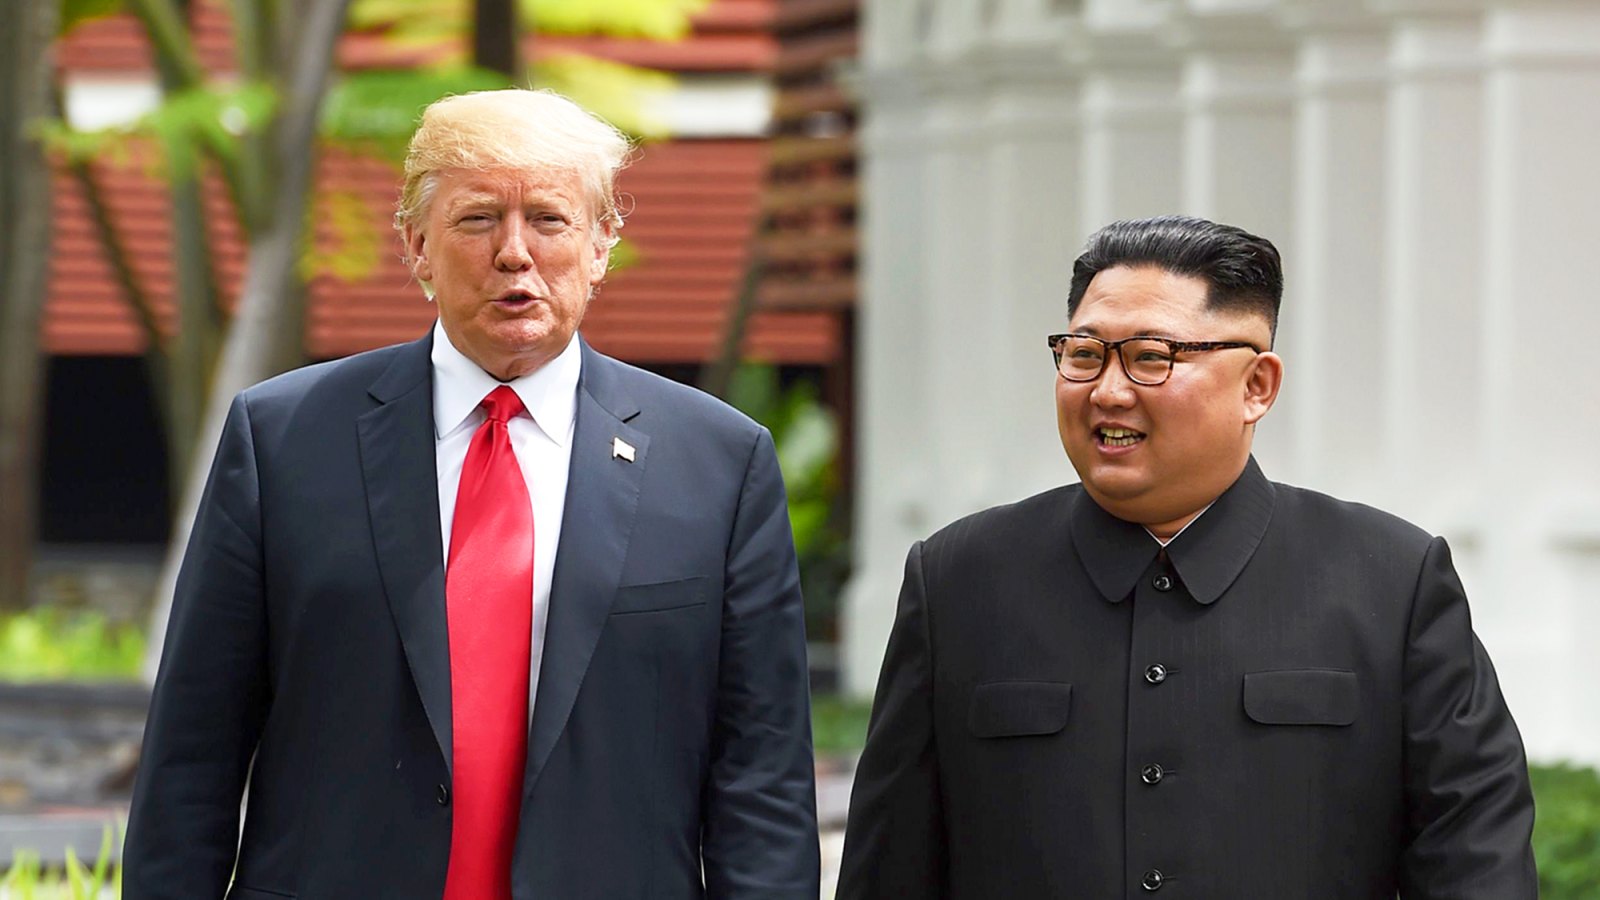 Donald Trump and Kim Jong Un during their historic US-North Korea summit at the Capella Hotel on Sentosa island in Singapore on June 12, 2018.